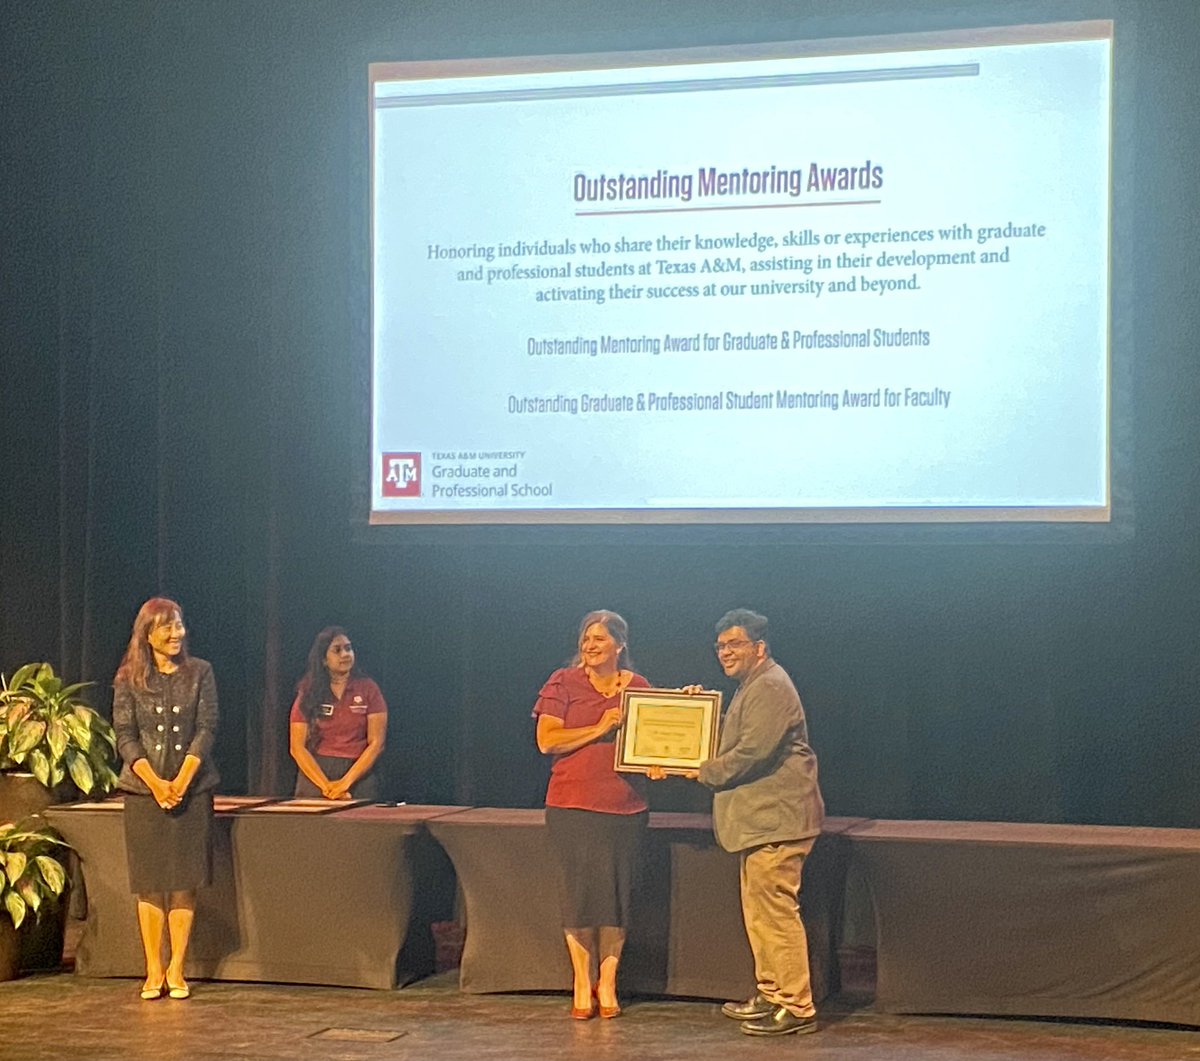 Congratulations to @SarbajitBanerj1 for being recognized for his exceptional mentorship of graduate students! An amazing record.